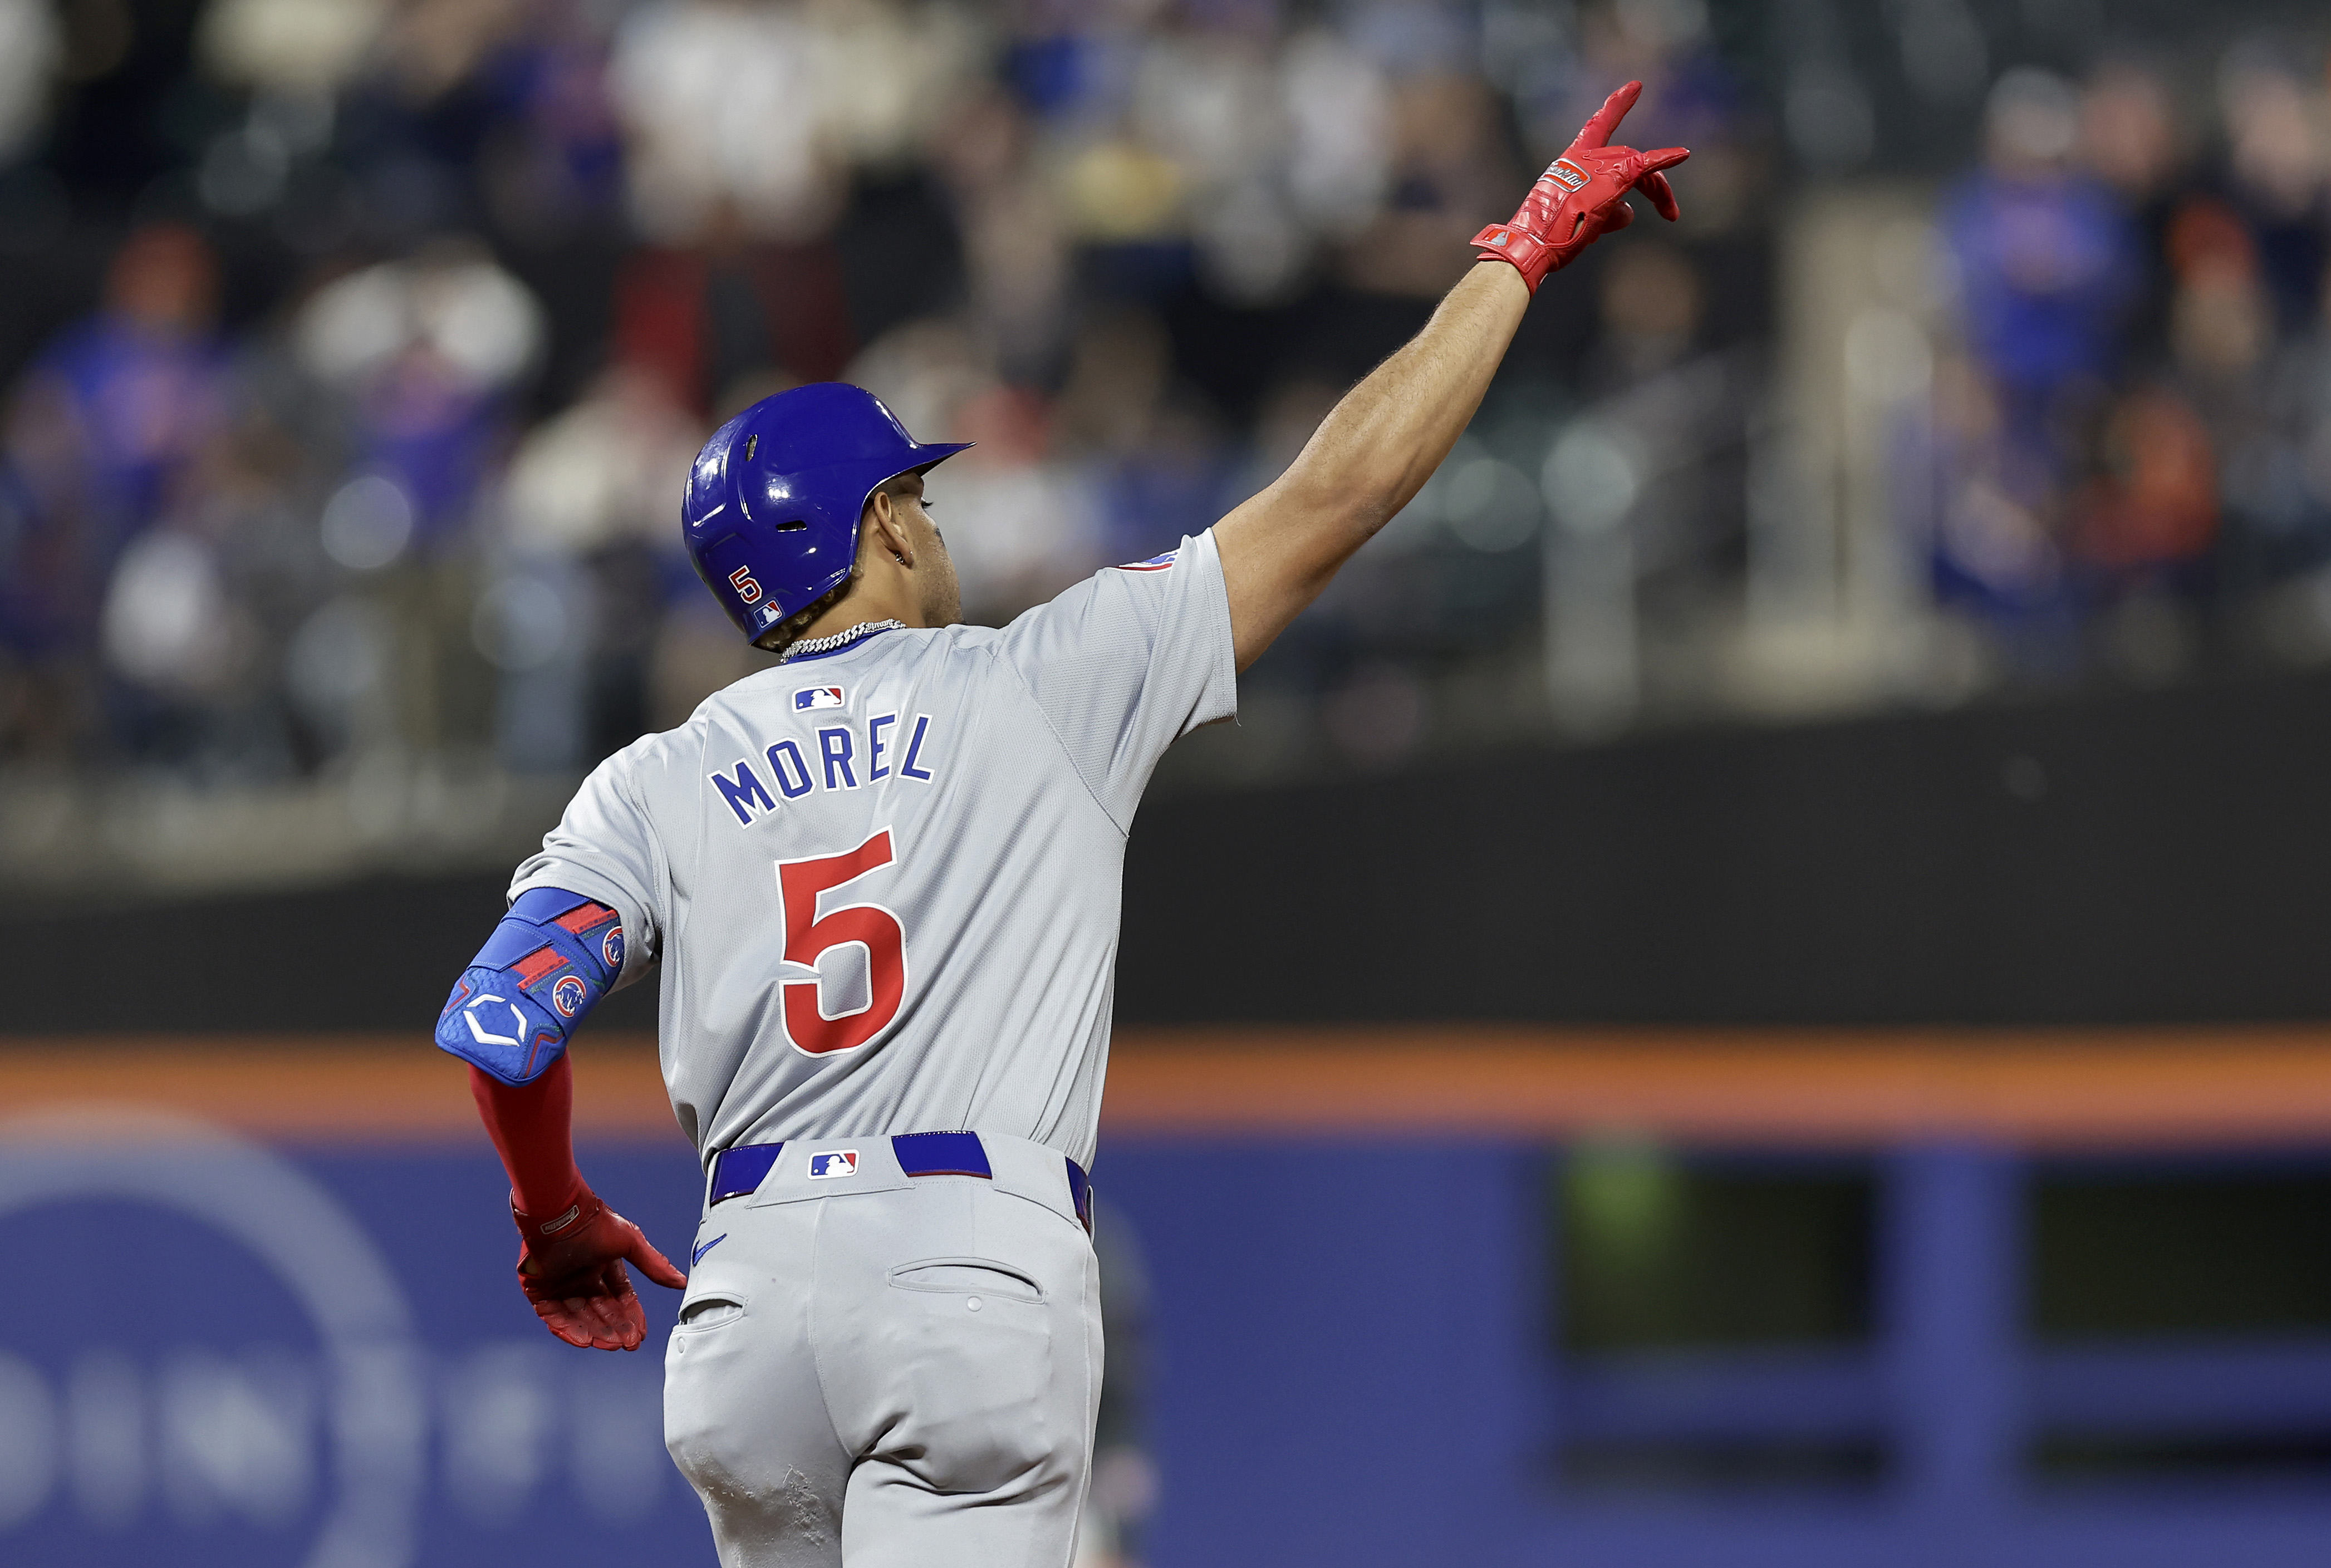 Tuesday Morning Sports 4/30: Morel delivers; Sox win streak ends; Lakers eliminated